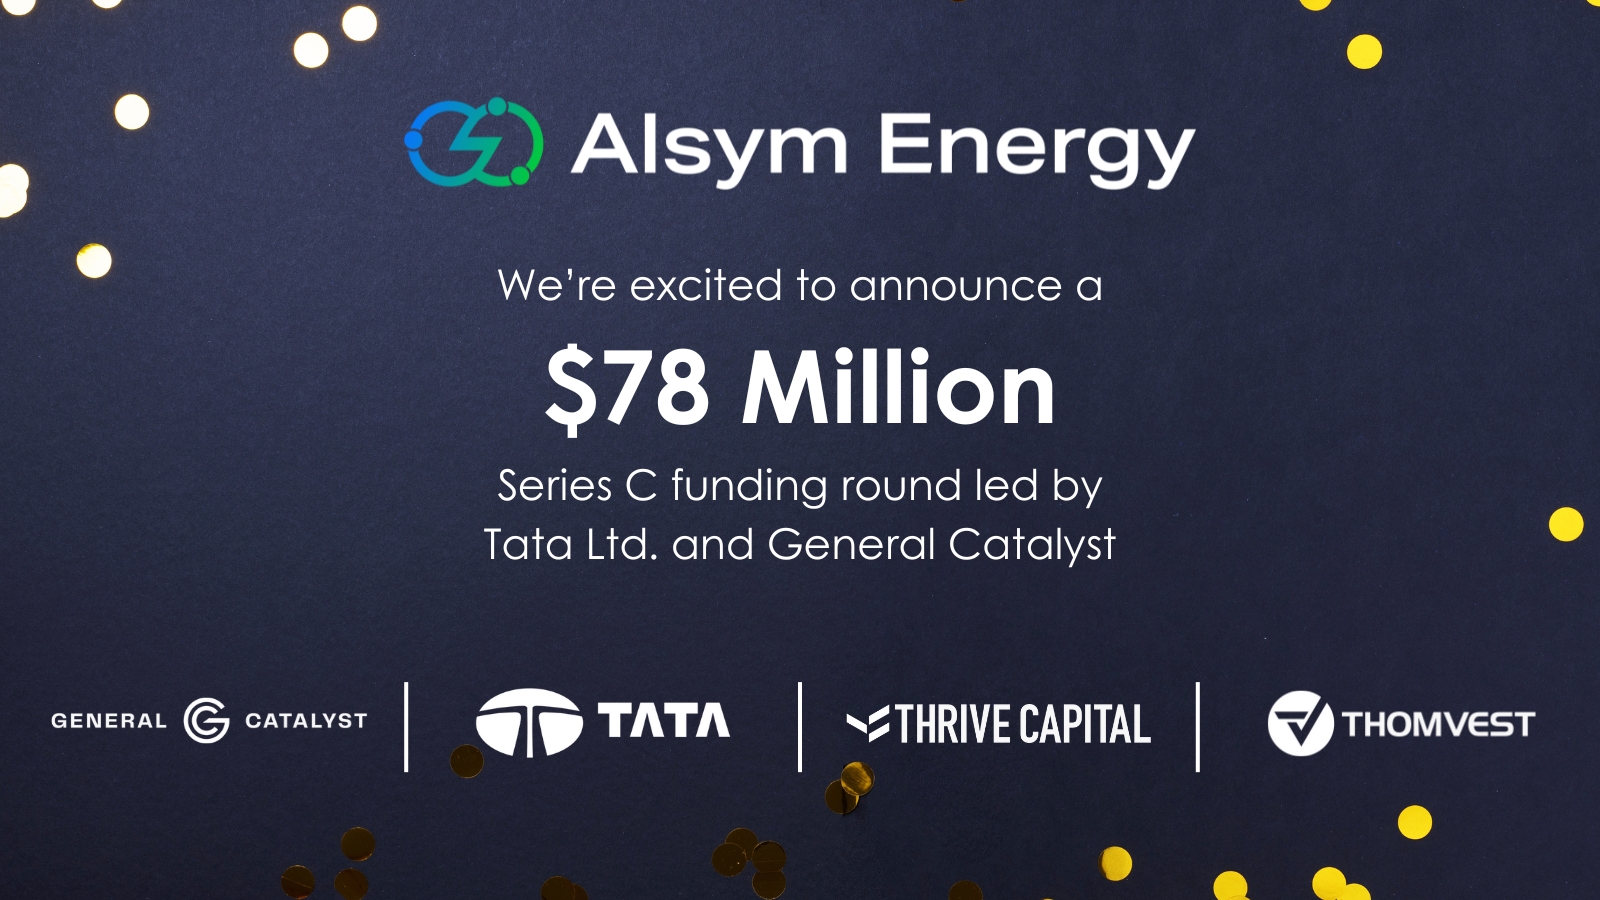 We’re excited to announce a $78 million funding round led by Tata Ltd. and General Catalyst